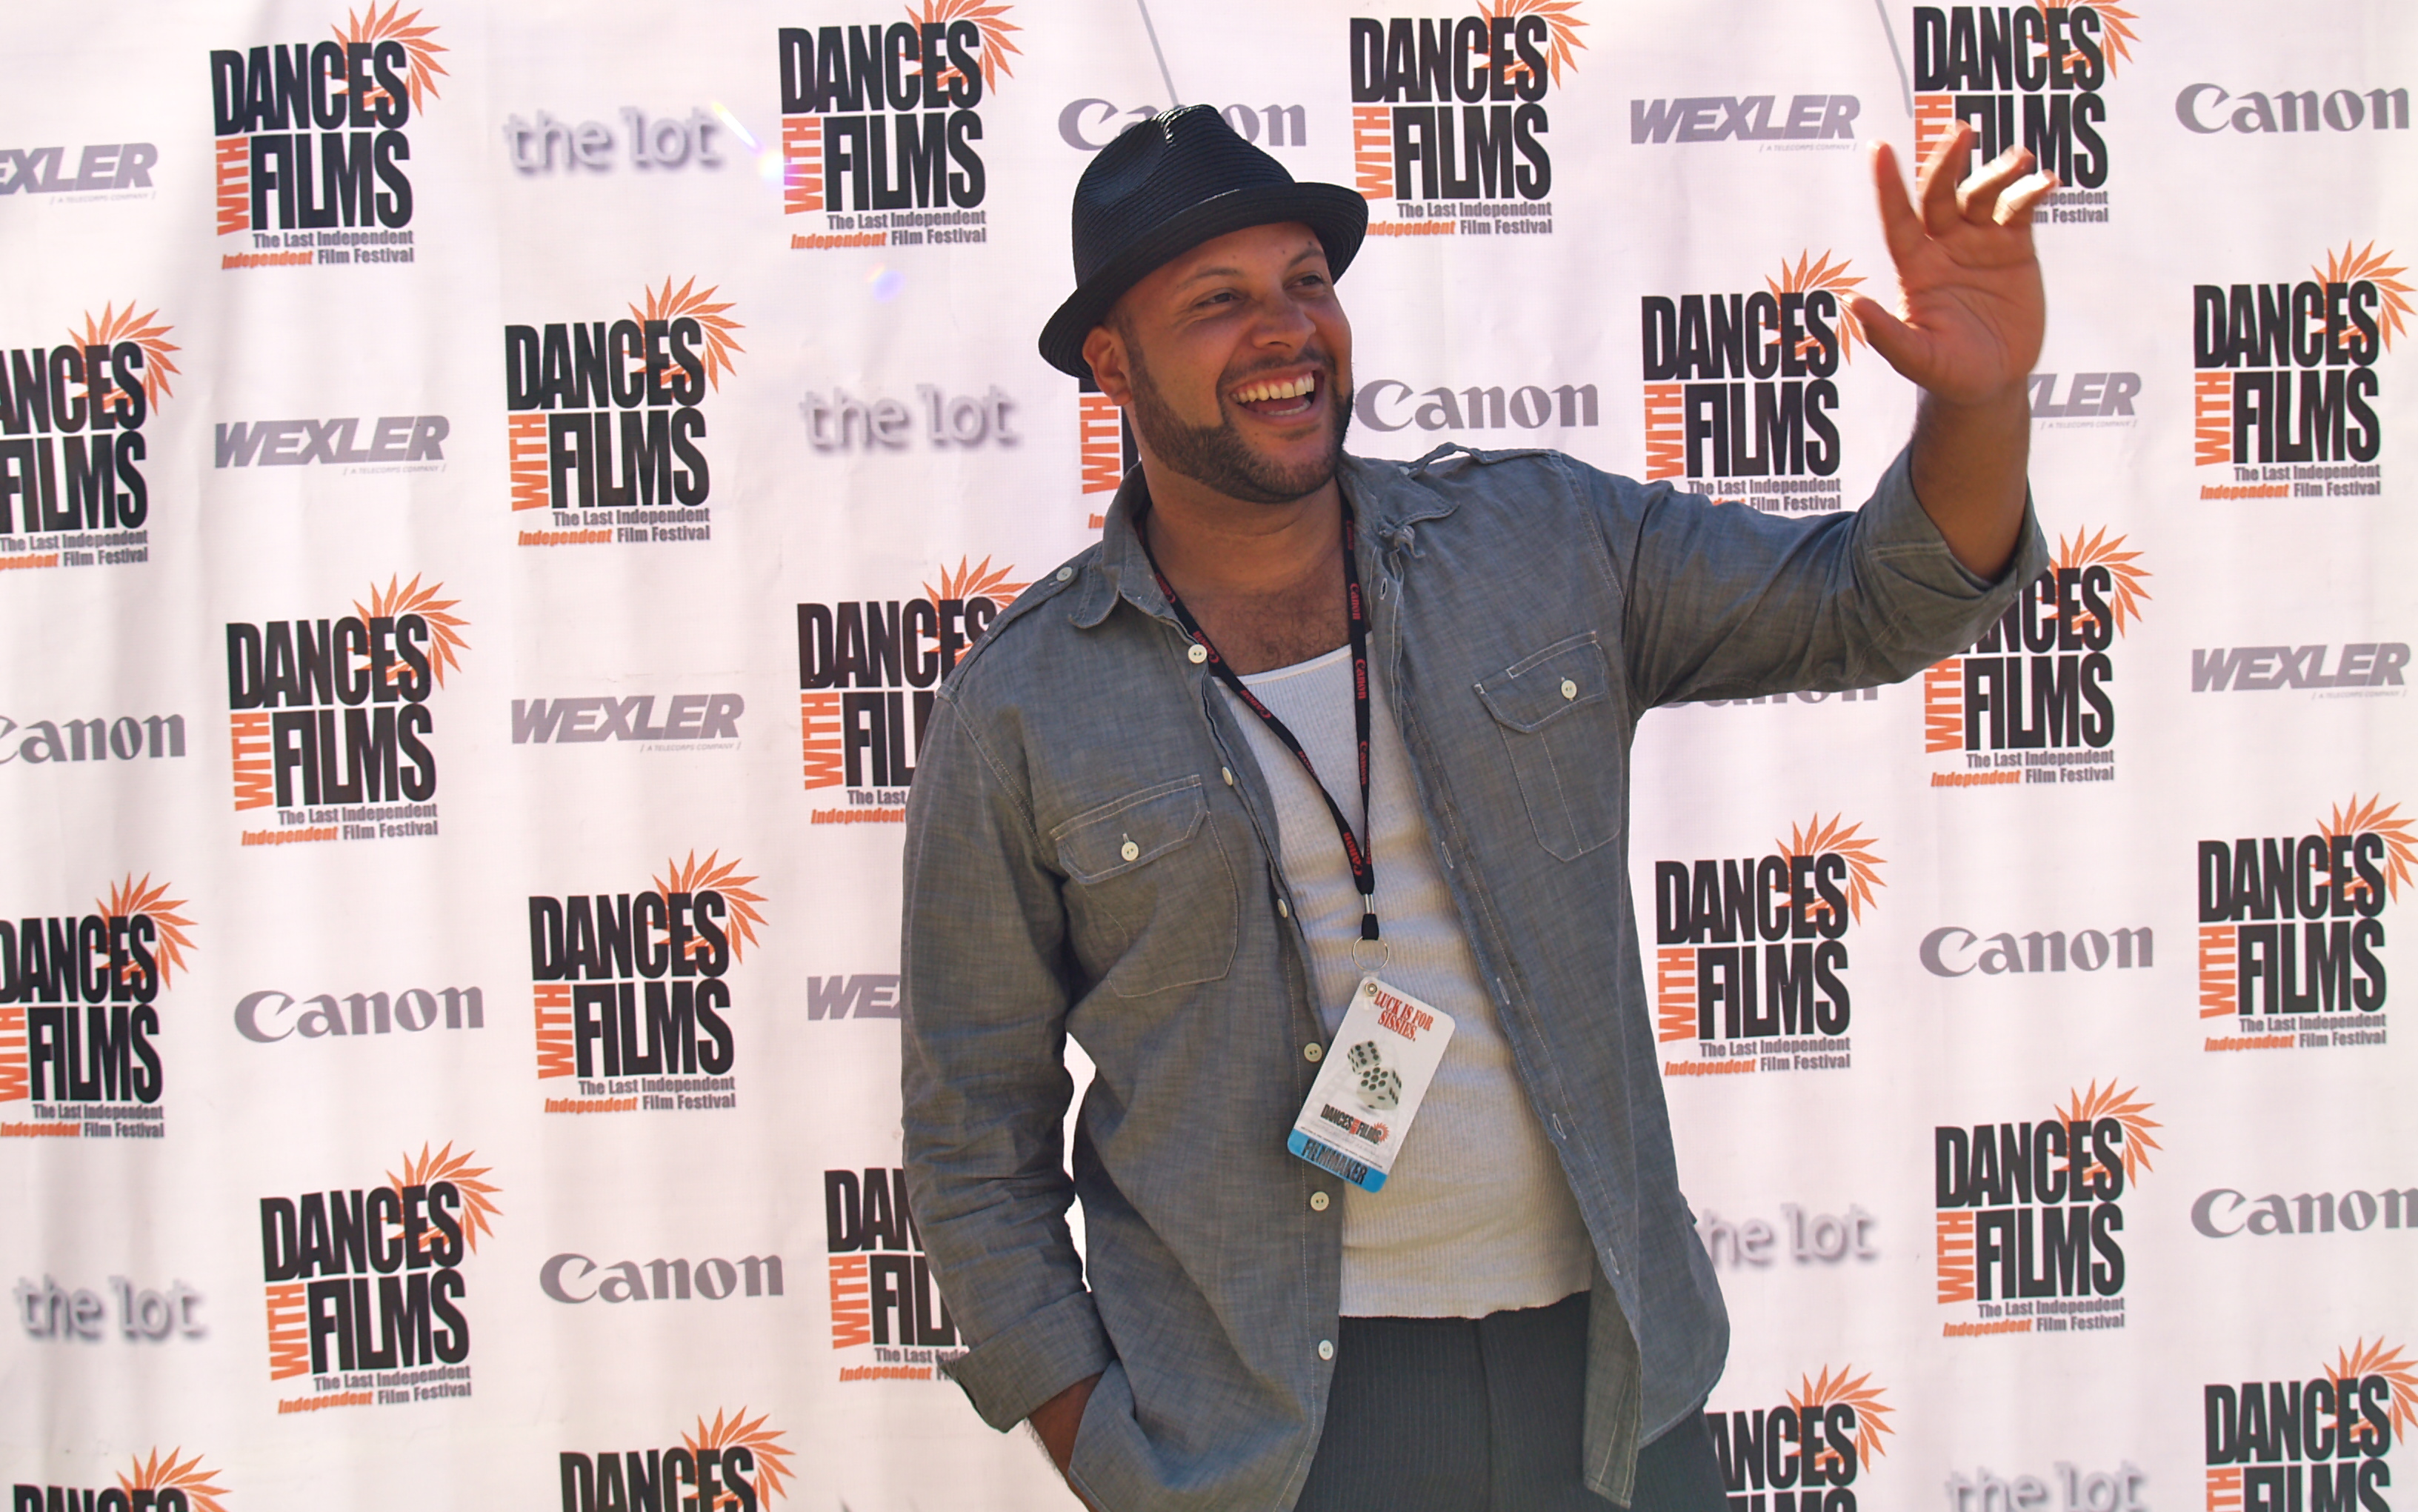 Conroe Brooks arrives at the 2010 Dances with Films Film Festival in Los Angeles, California.